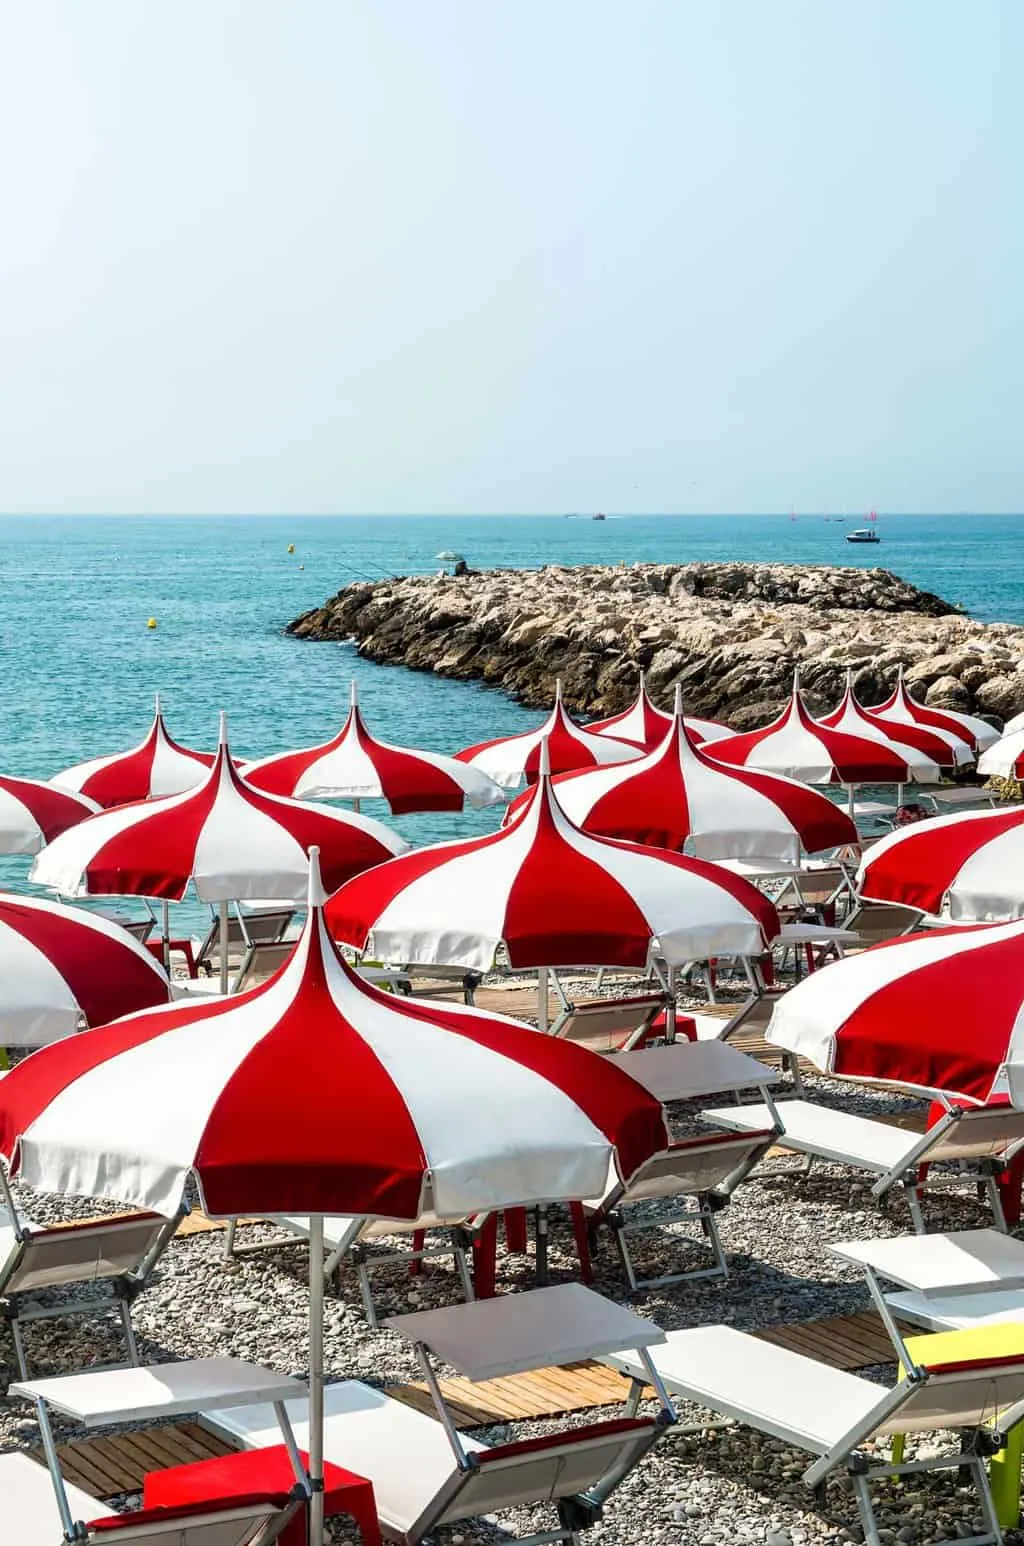 Red and white umbrellas and sun lounges line the pebble beach in Cagnes-sur-Mer overlooking turquoise blue water on a sunny day.